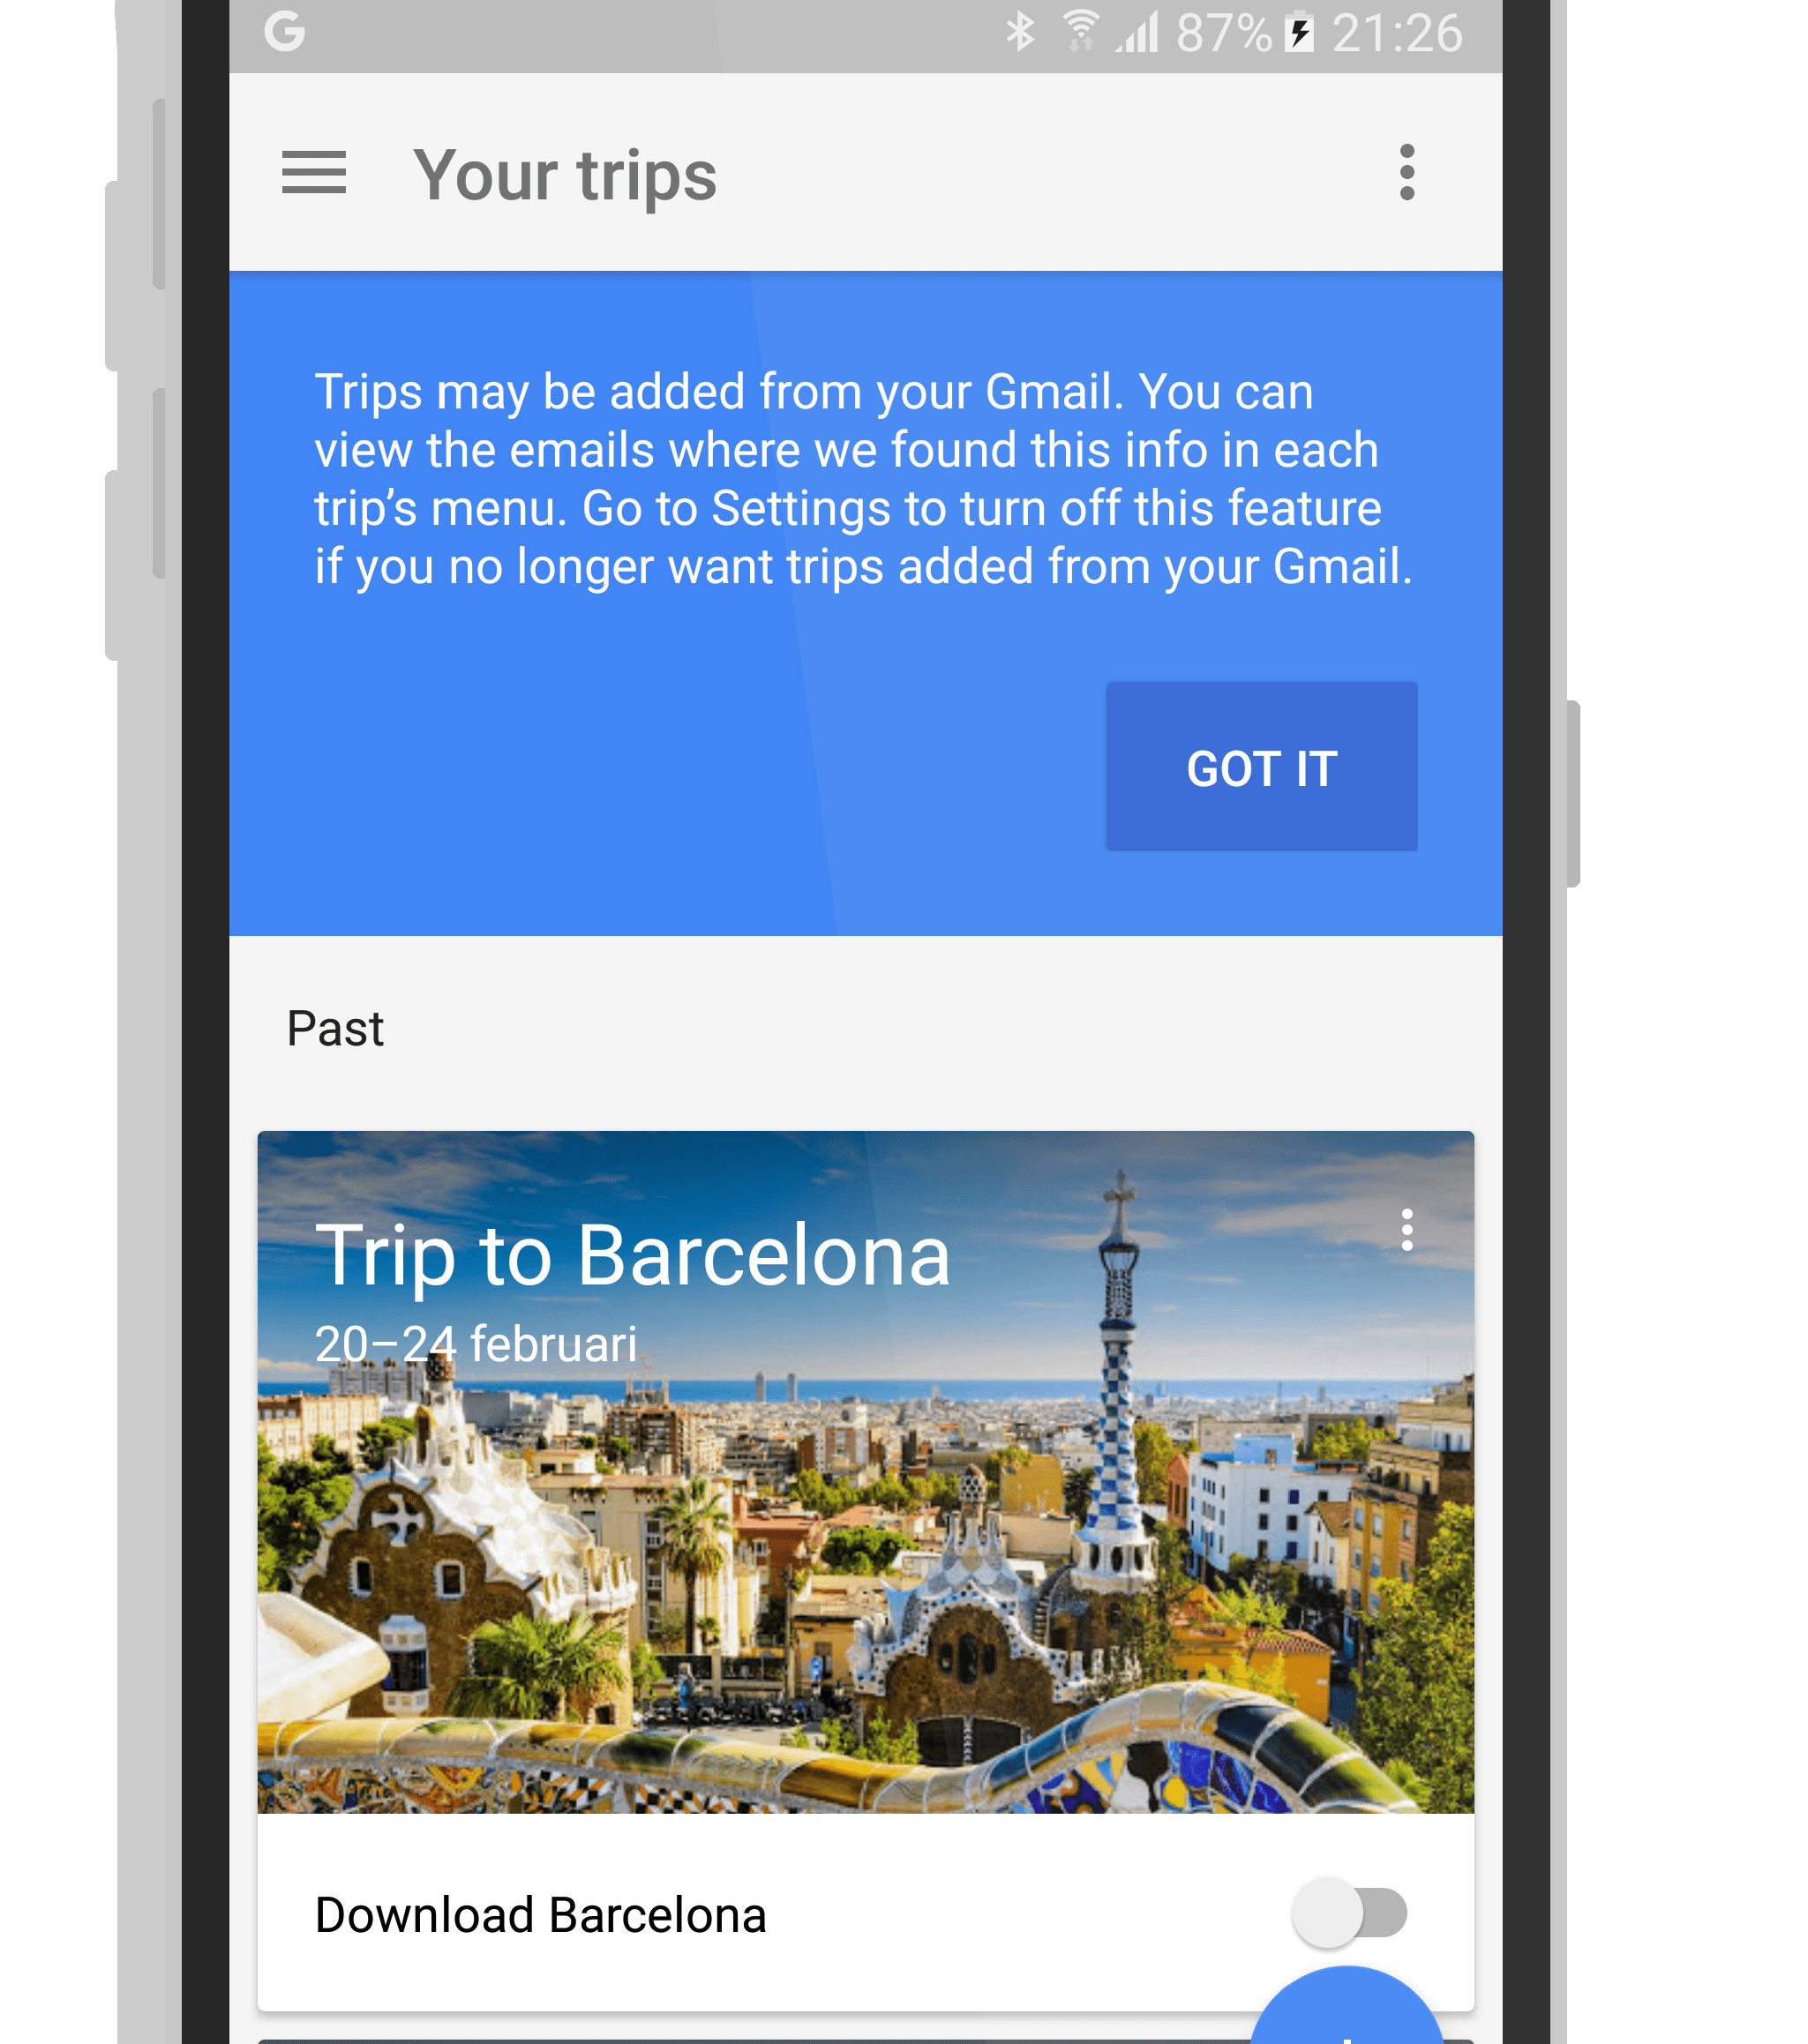 Download Google Trips 0.0.26 APK for Android Phone or Tablet - 2049 x 2317 png 1672kB